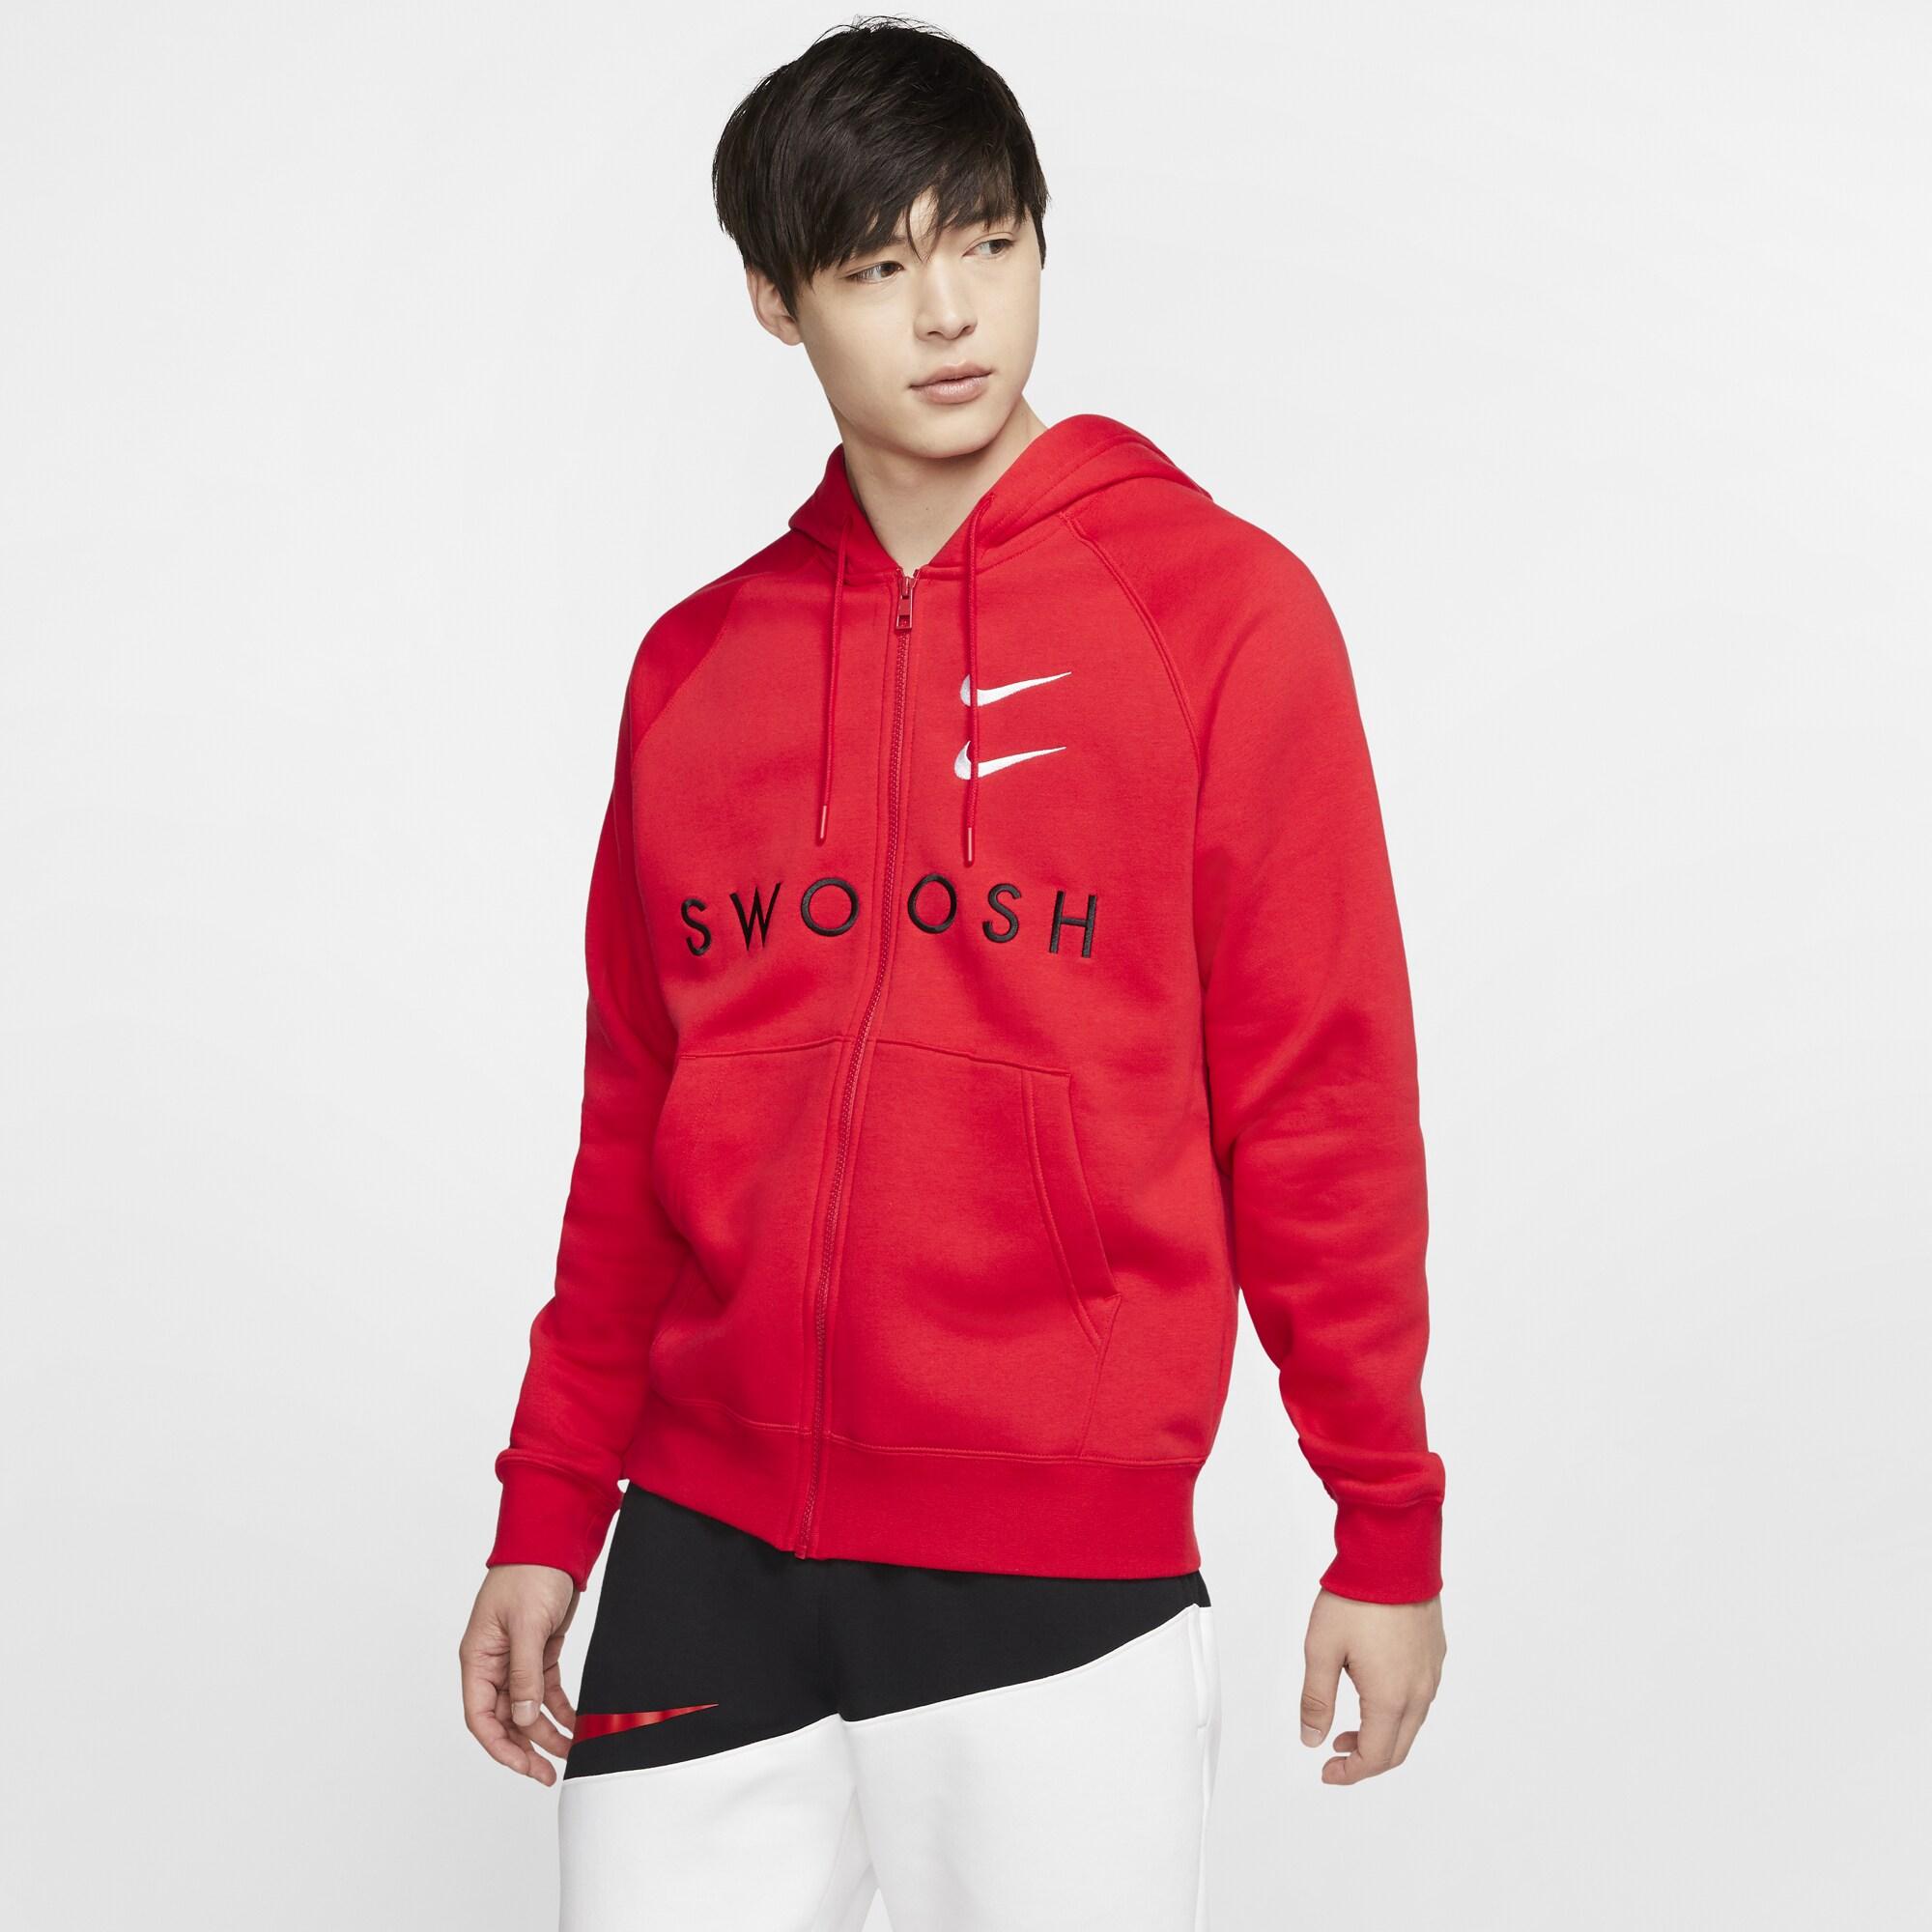 Nike Cotton Double Swoosh F/z Hoodie in University Red/White (Red) for Men  - Lyst